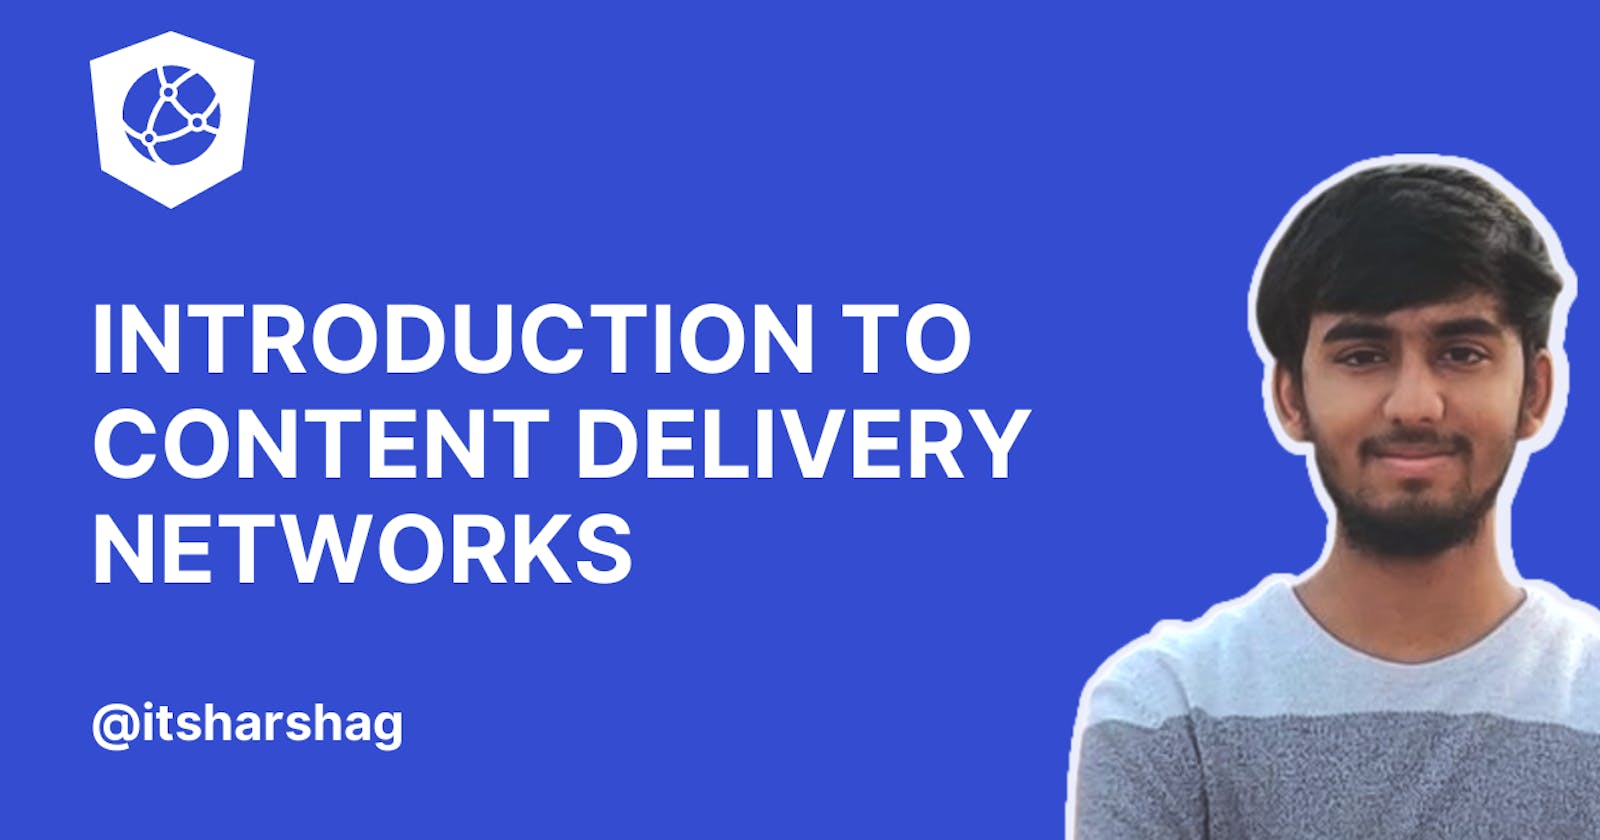 Introduction to Content Delivery Networks